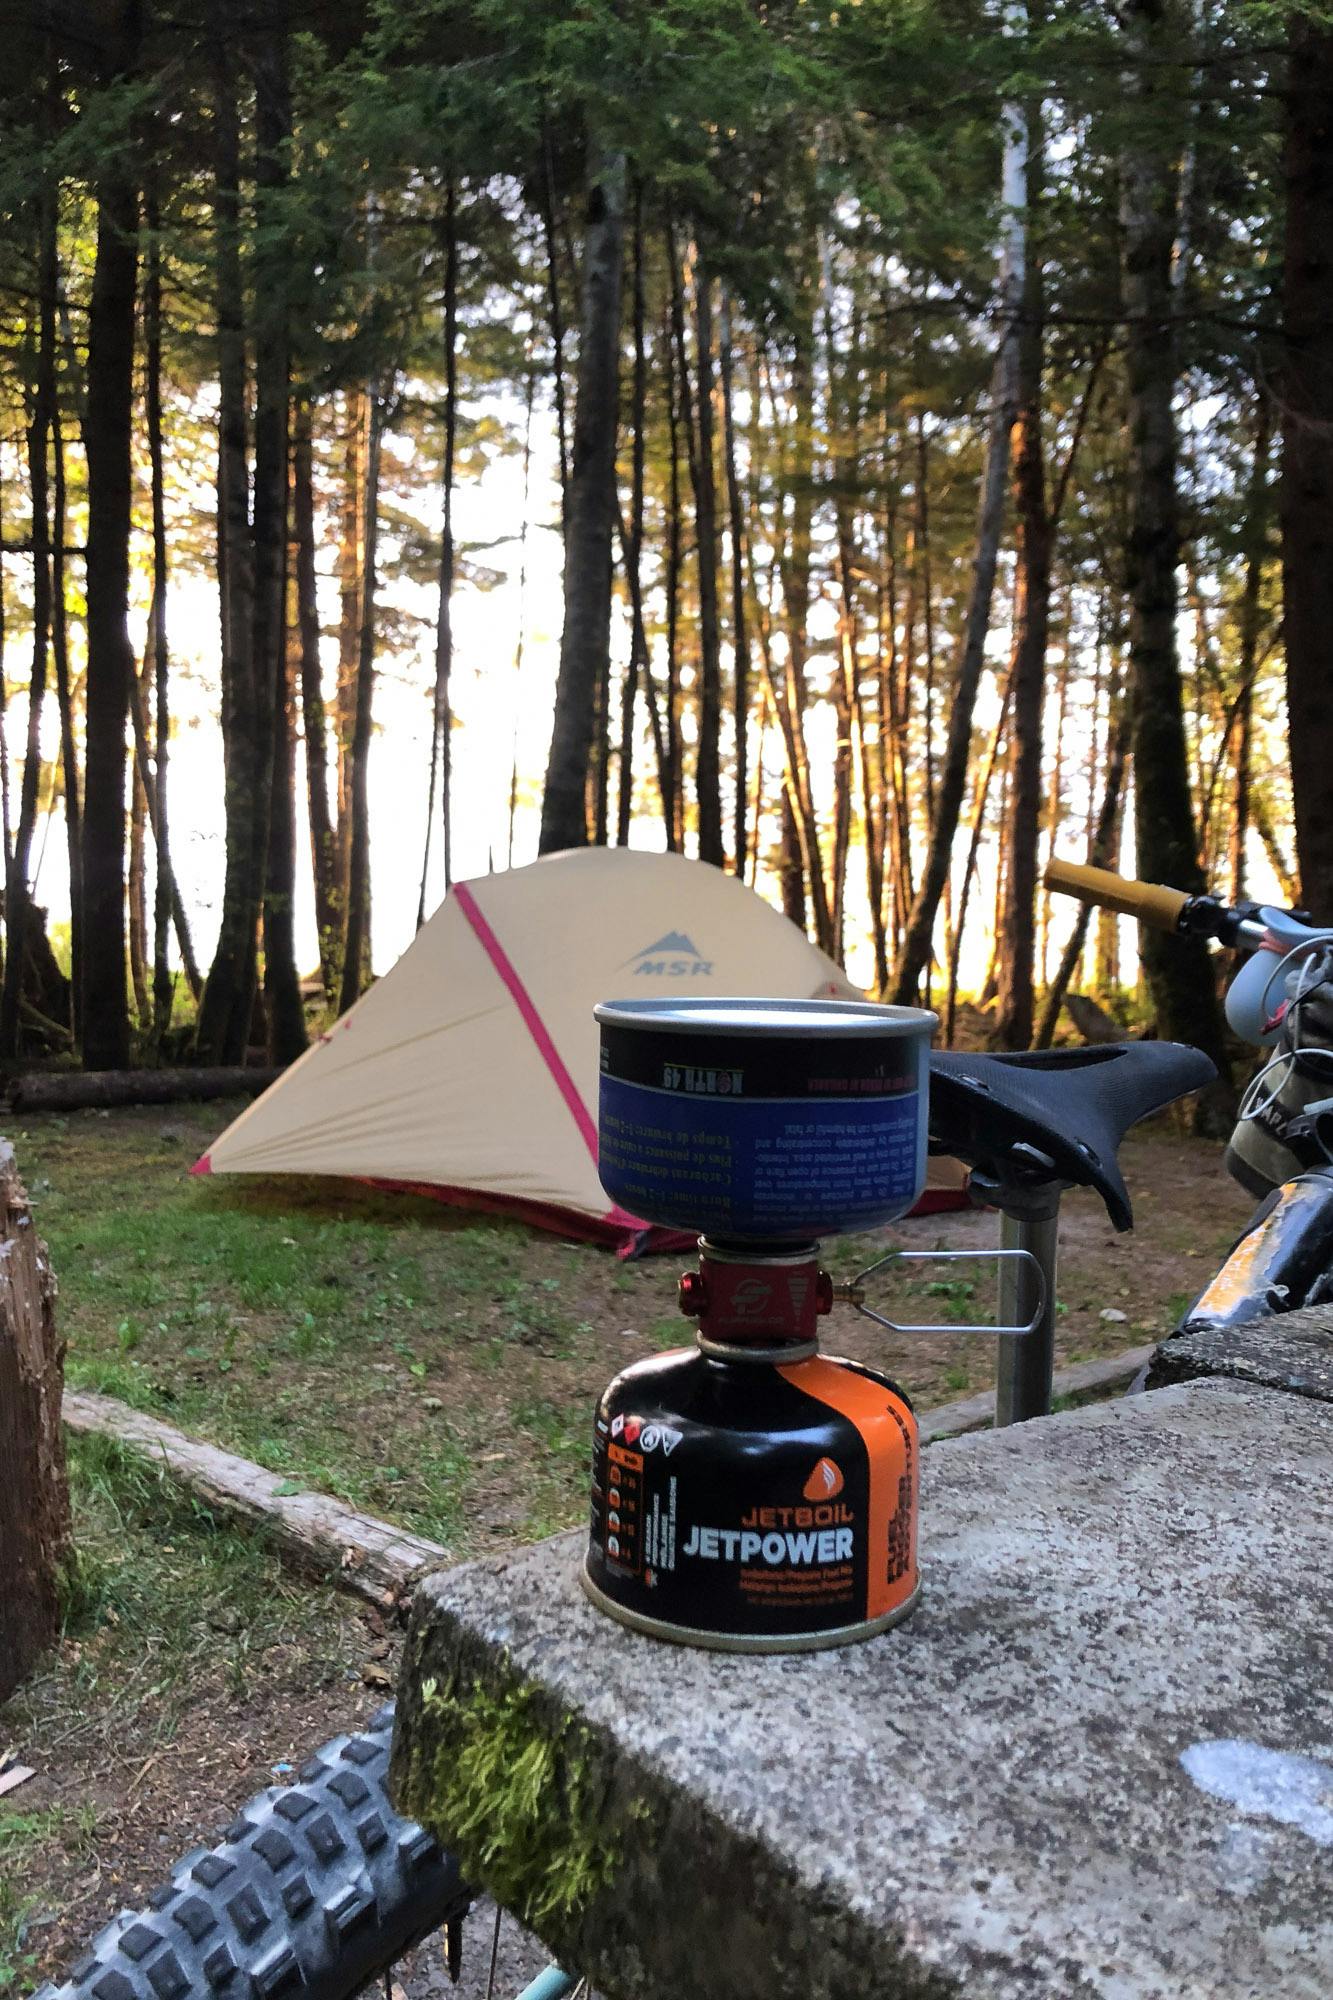 A campsite with a tent and portable stove.